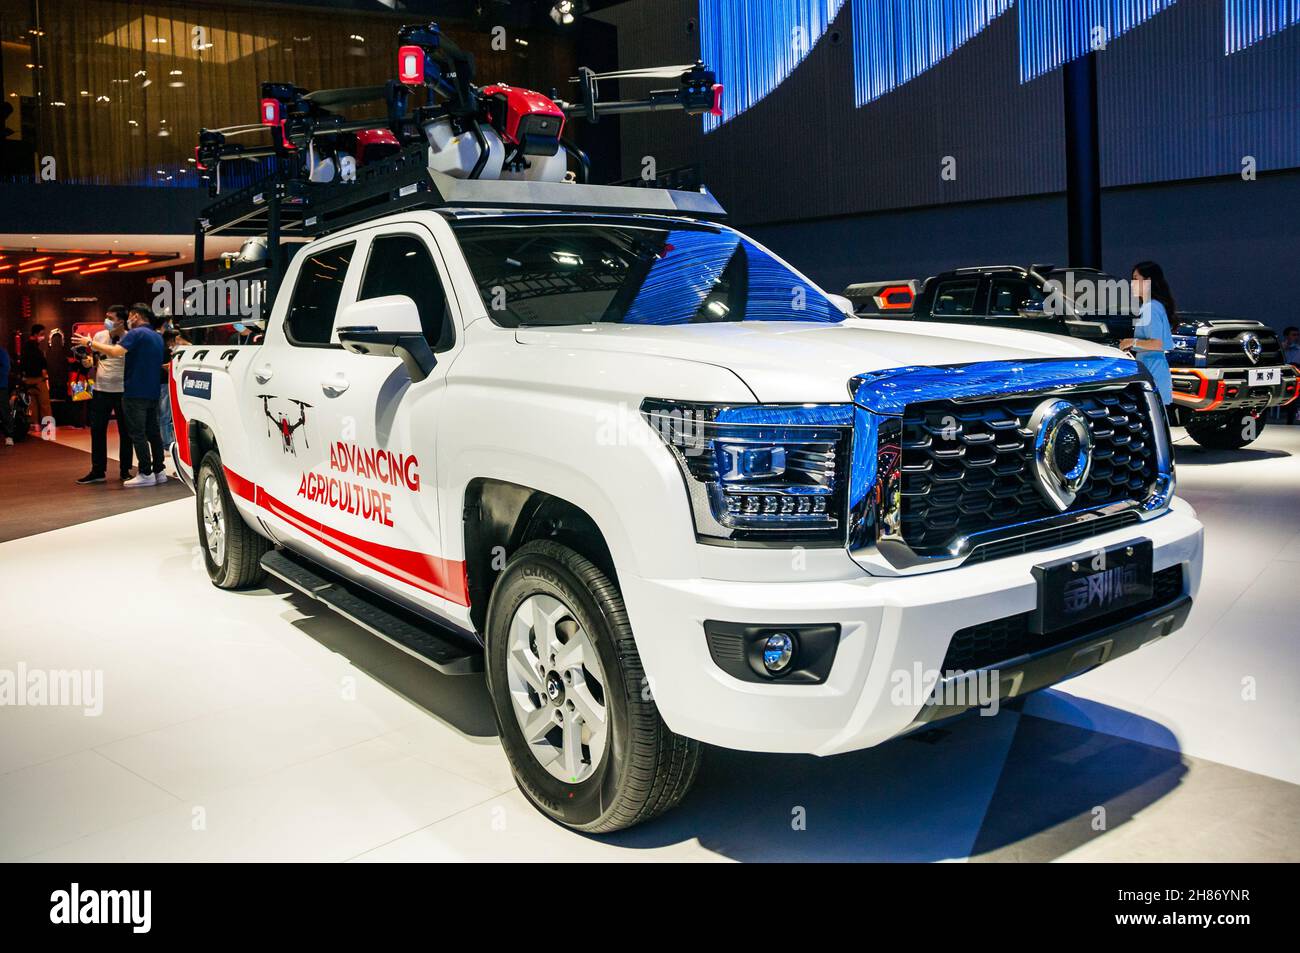 GWM Poer King Kong Canon Advancing Agriculture concept pickup truck on display at the 2021 Guangzhou Auto Show, Guangdong Province, China. Stock Photo